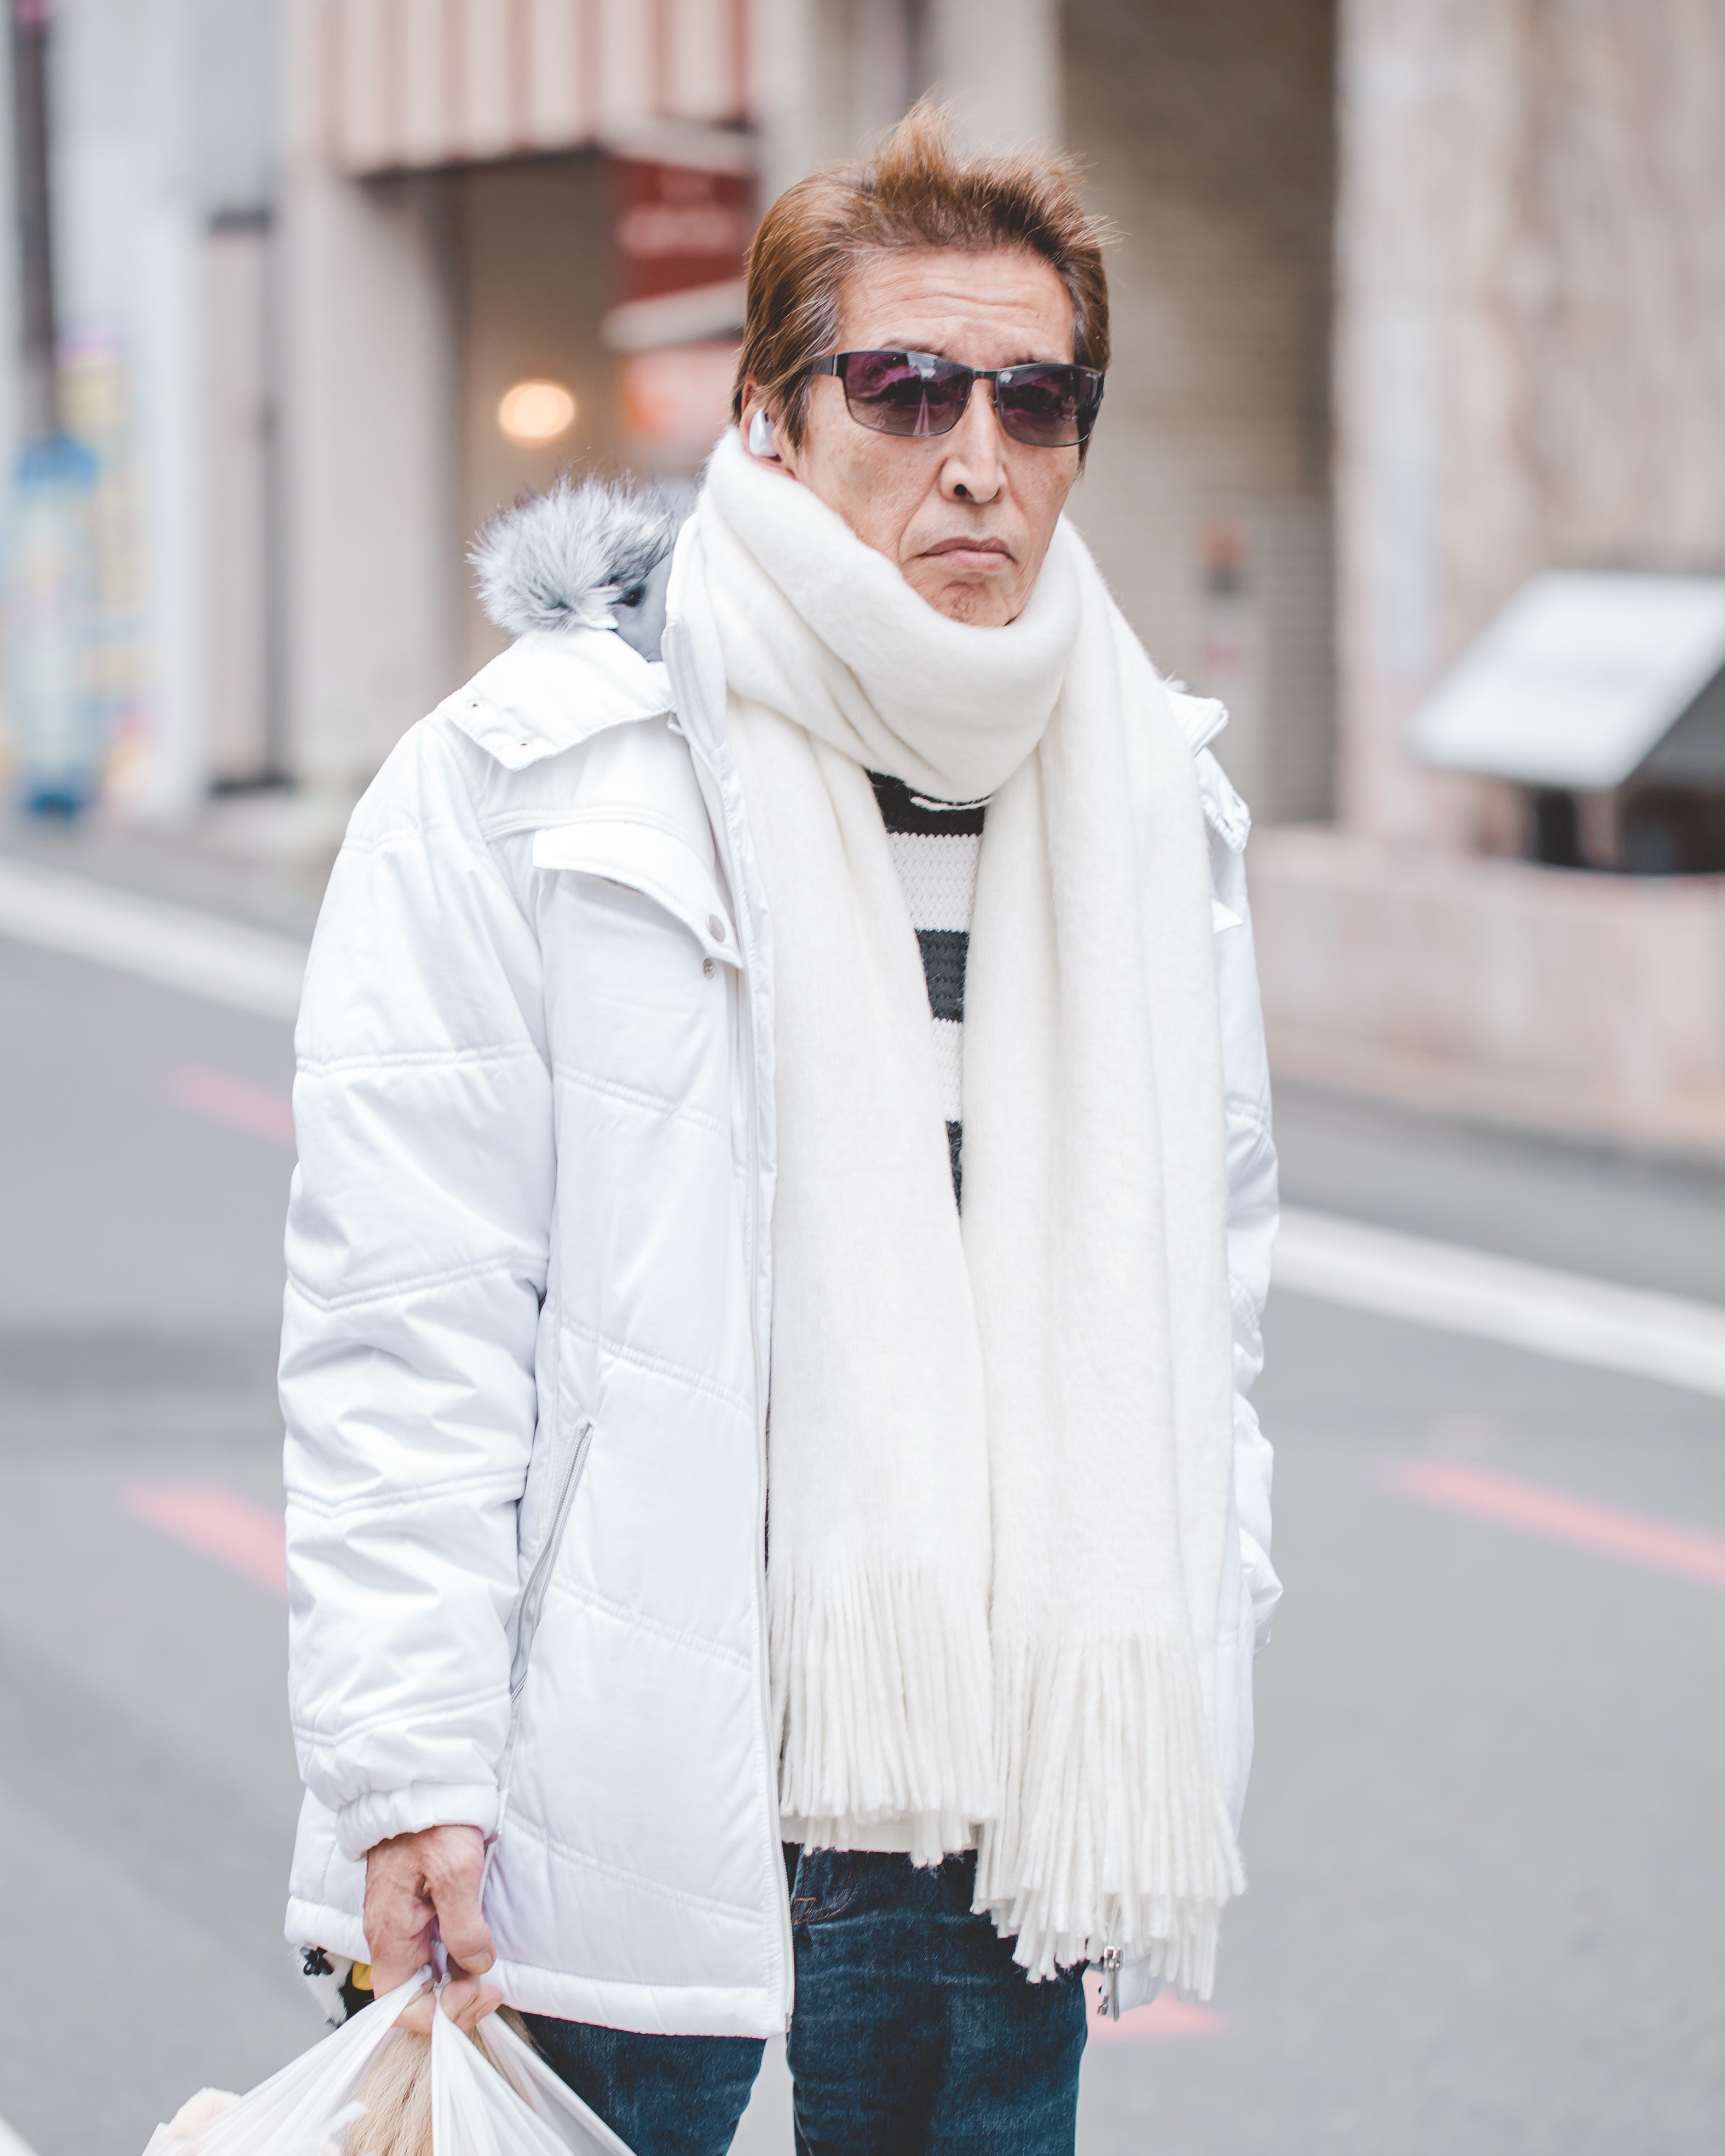 Man in Kyoto wearing the classic loop-styled scarf in a white outfit and jeans.